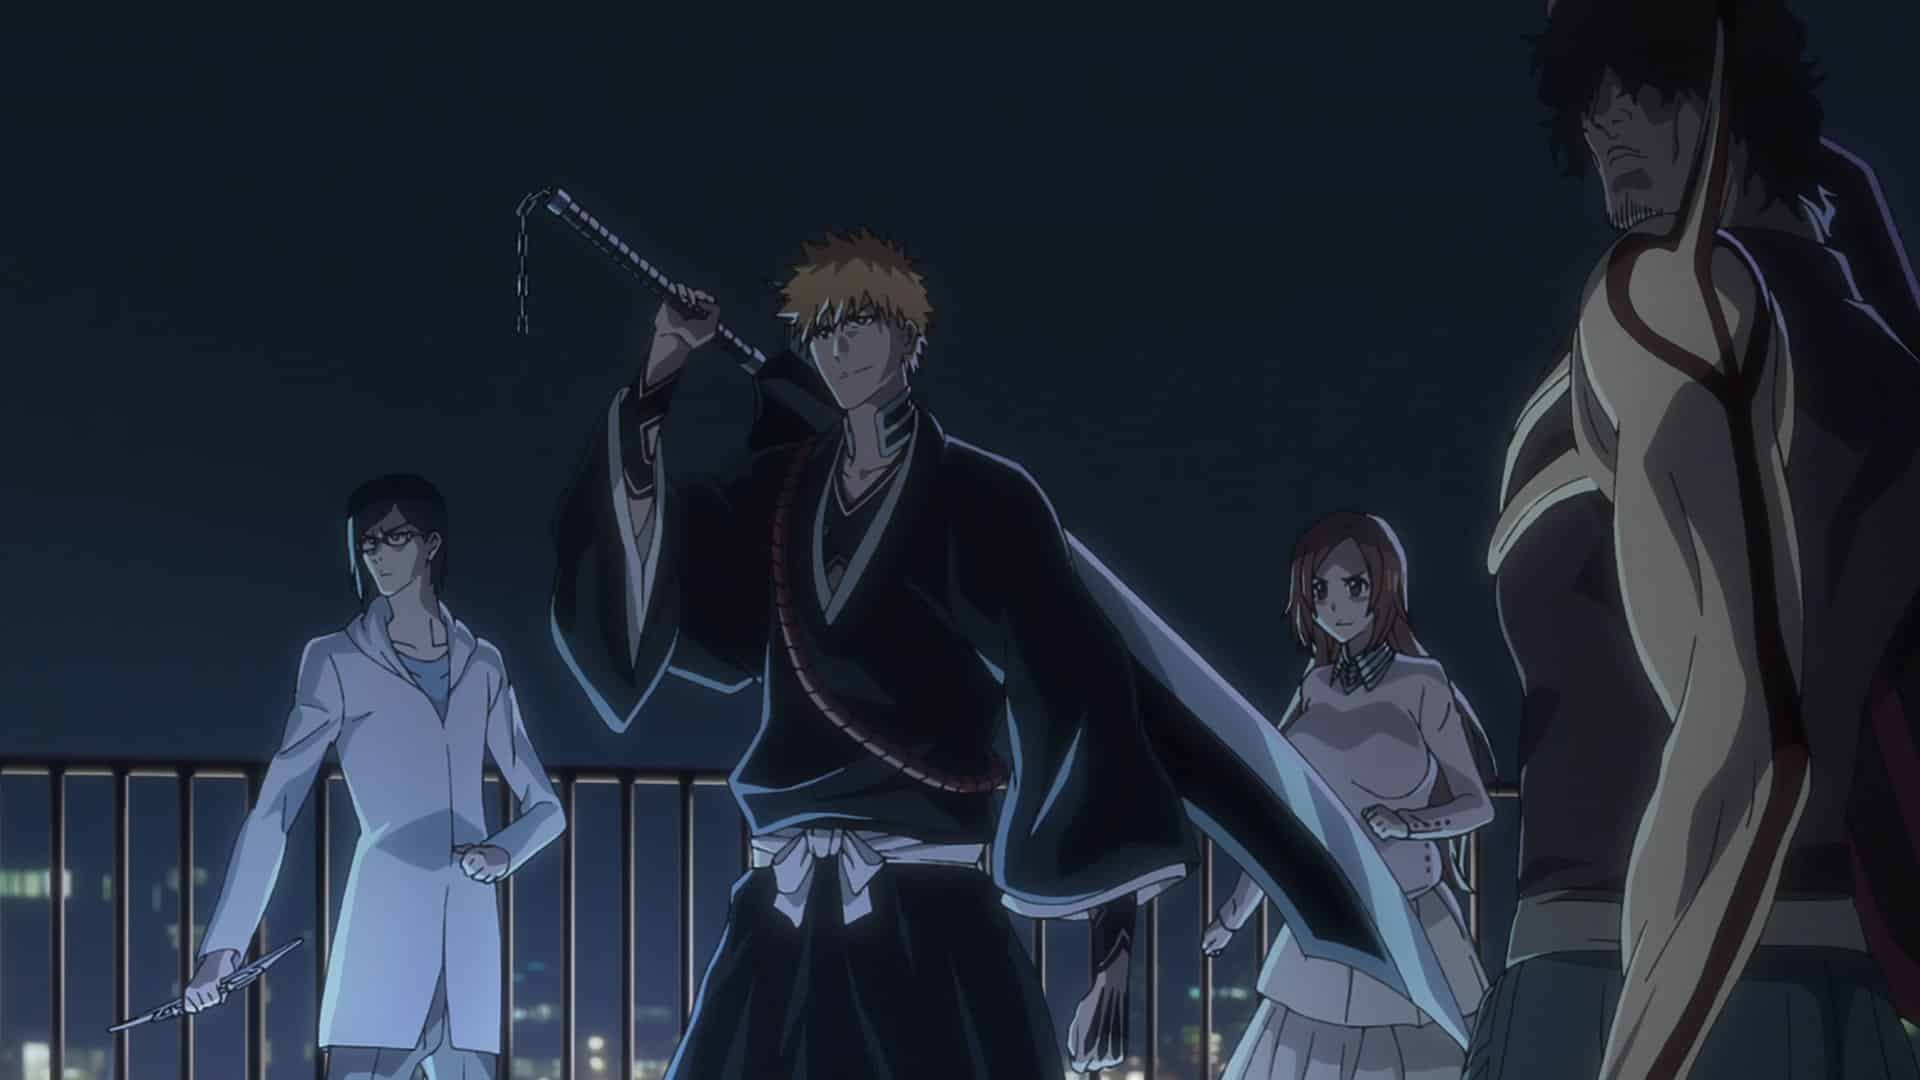 Bleach: The Thousand-Year Blood War – Deicide in Japanese Media